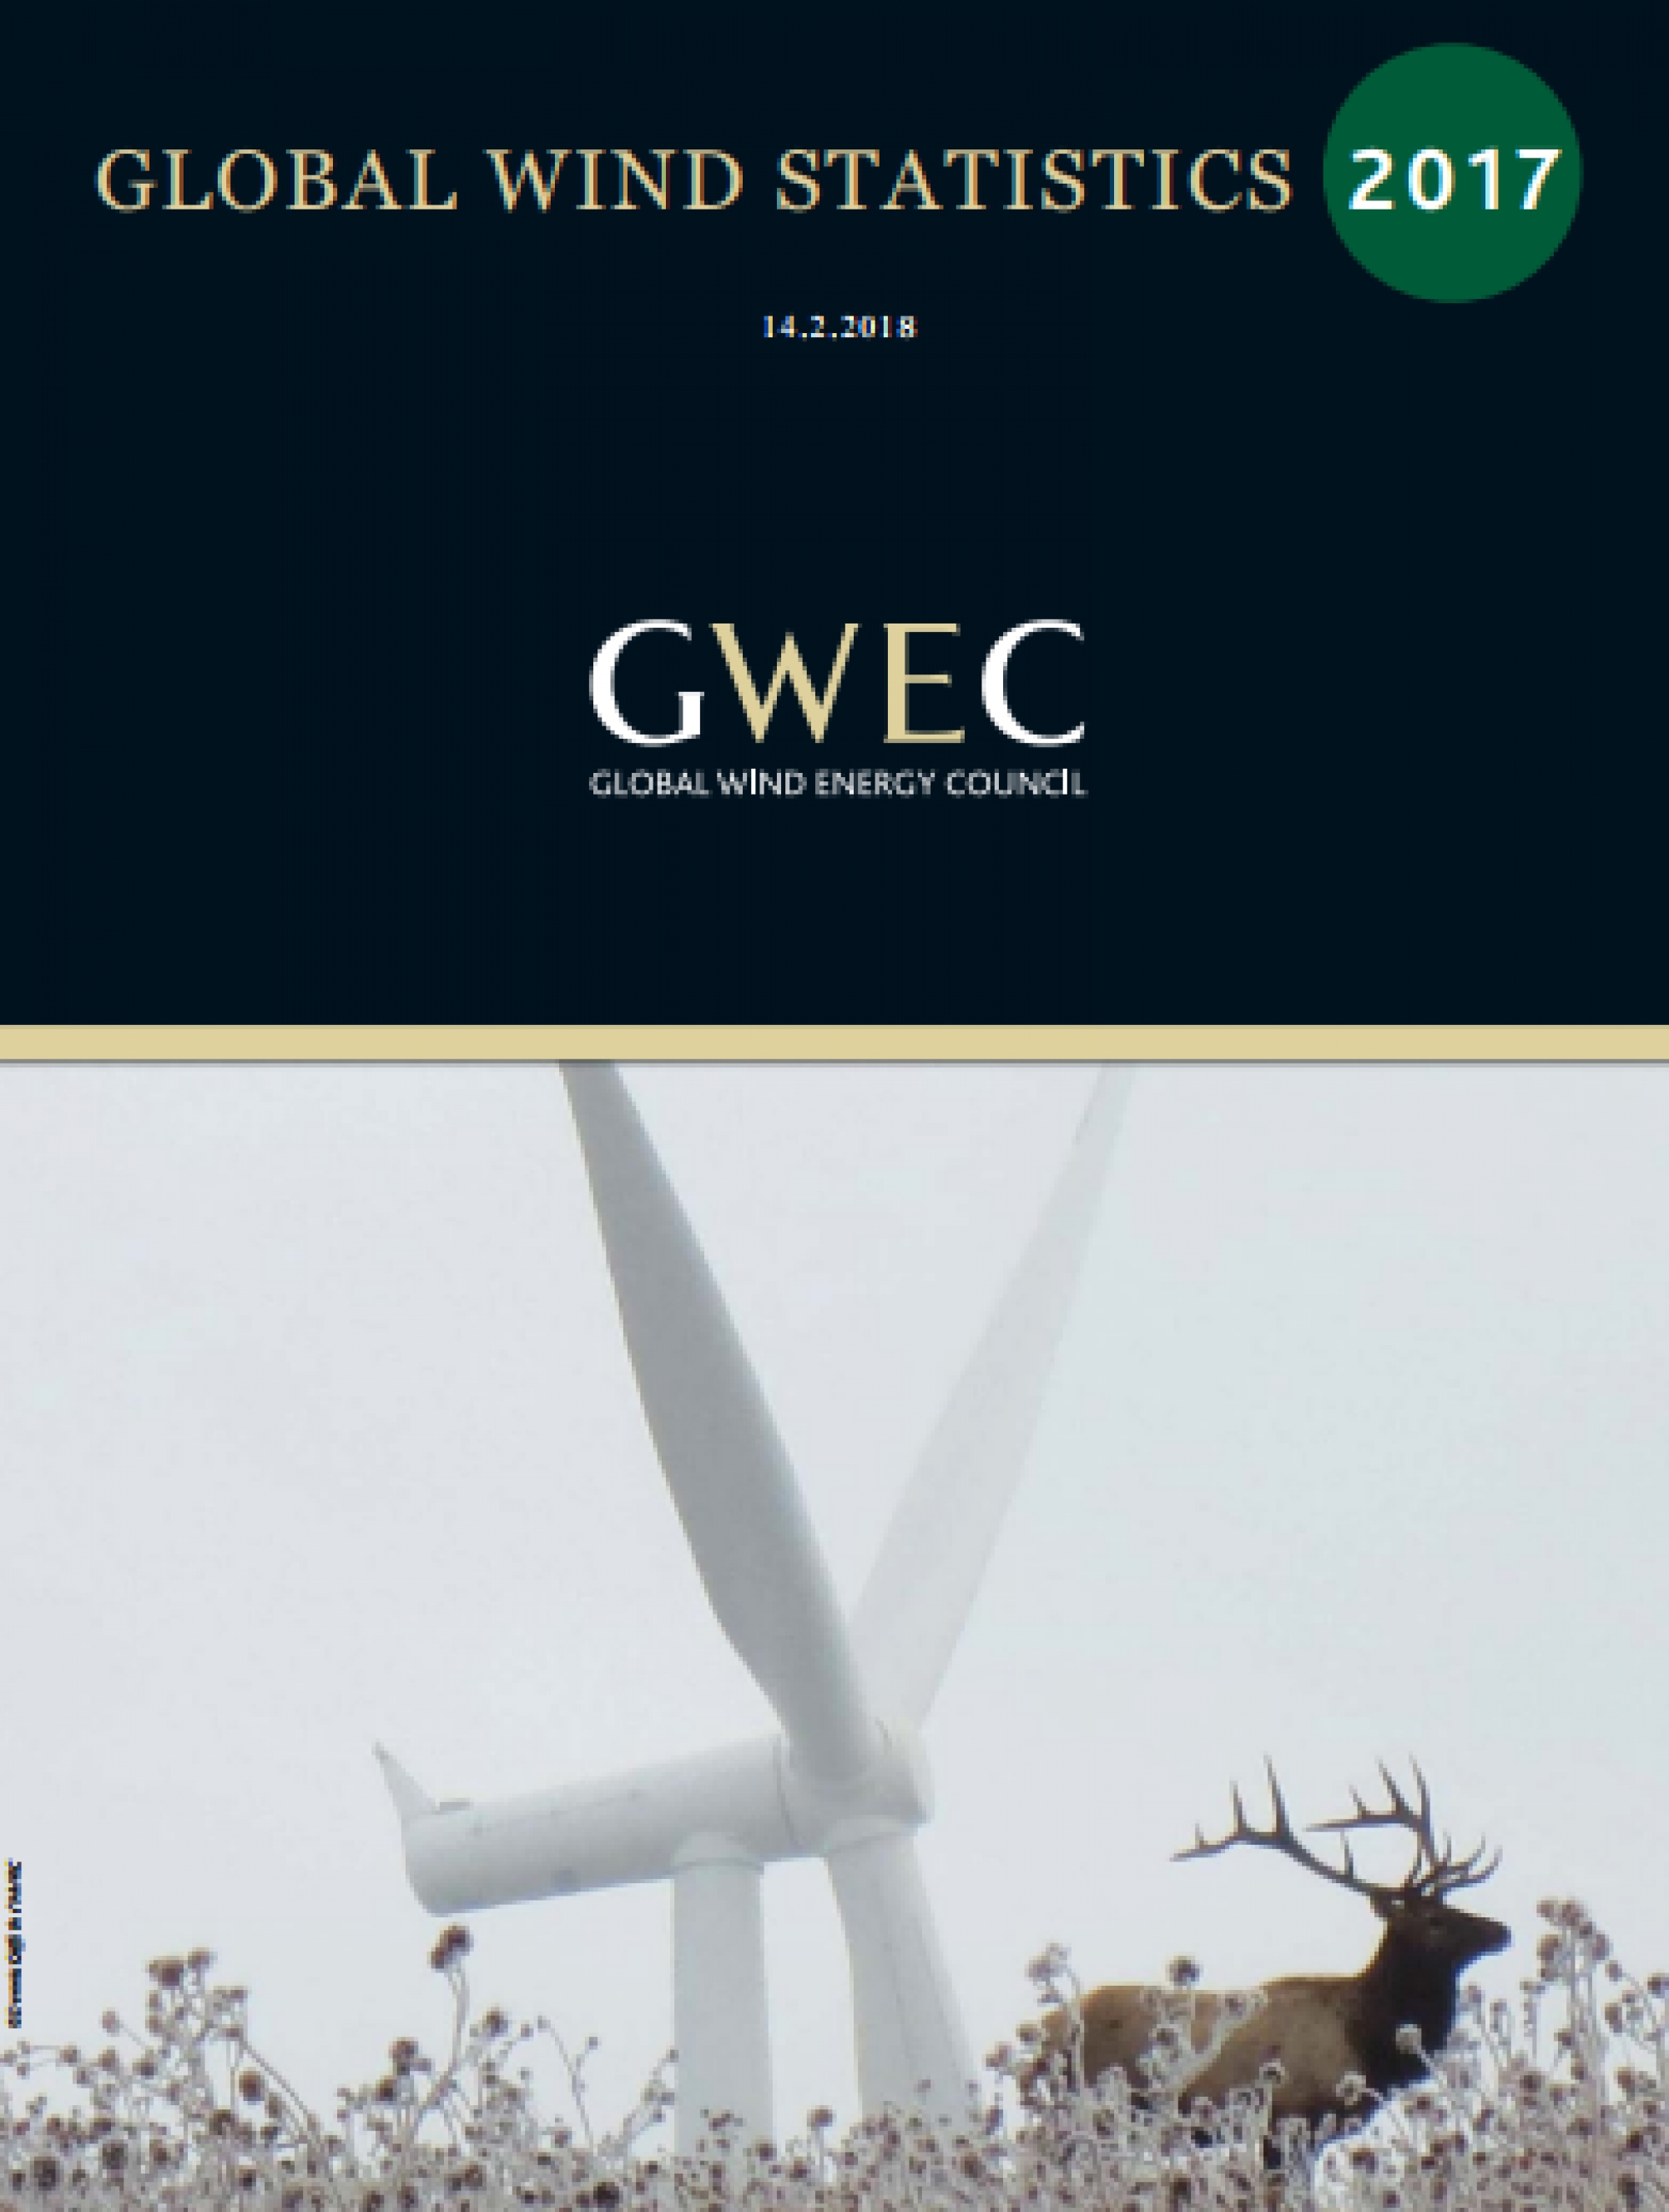 Global Wind Energy Council presents its Annual Wind Balance 2017